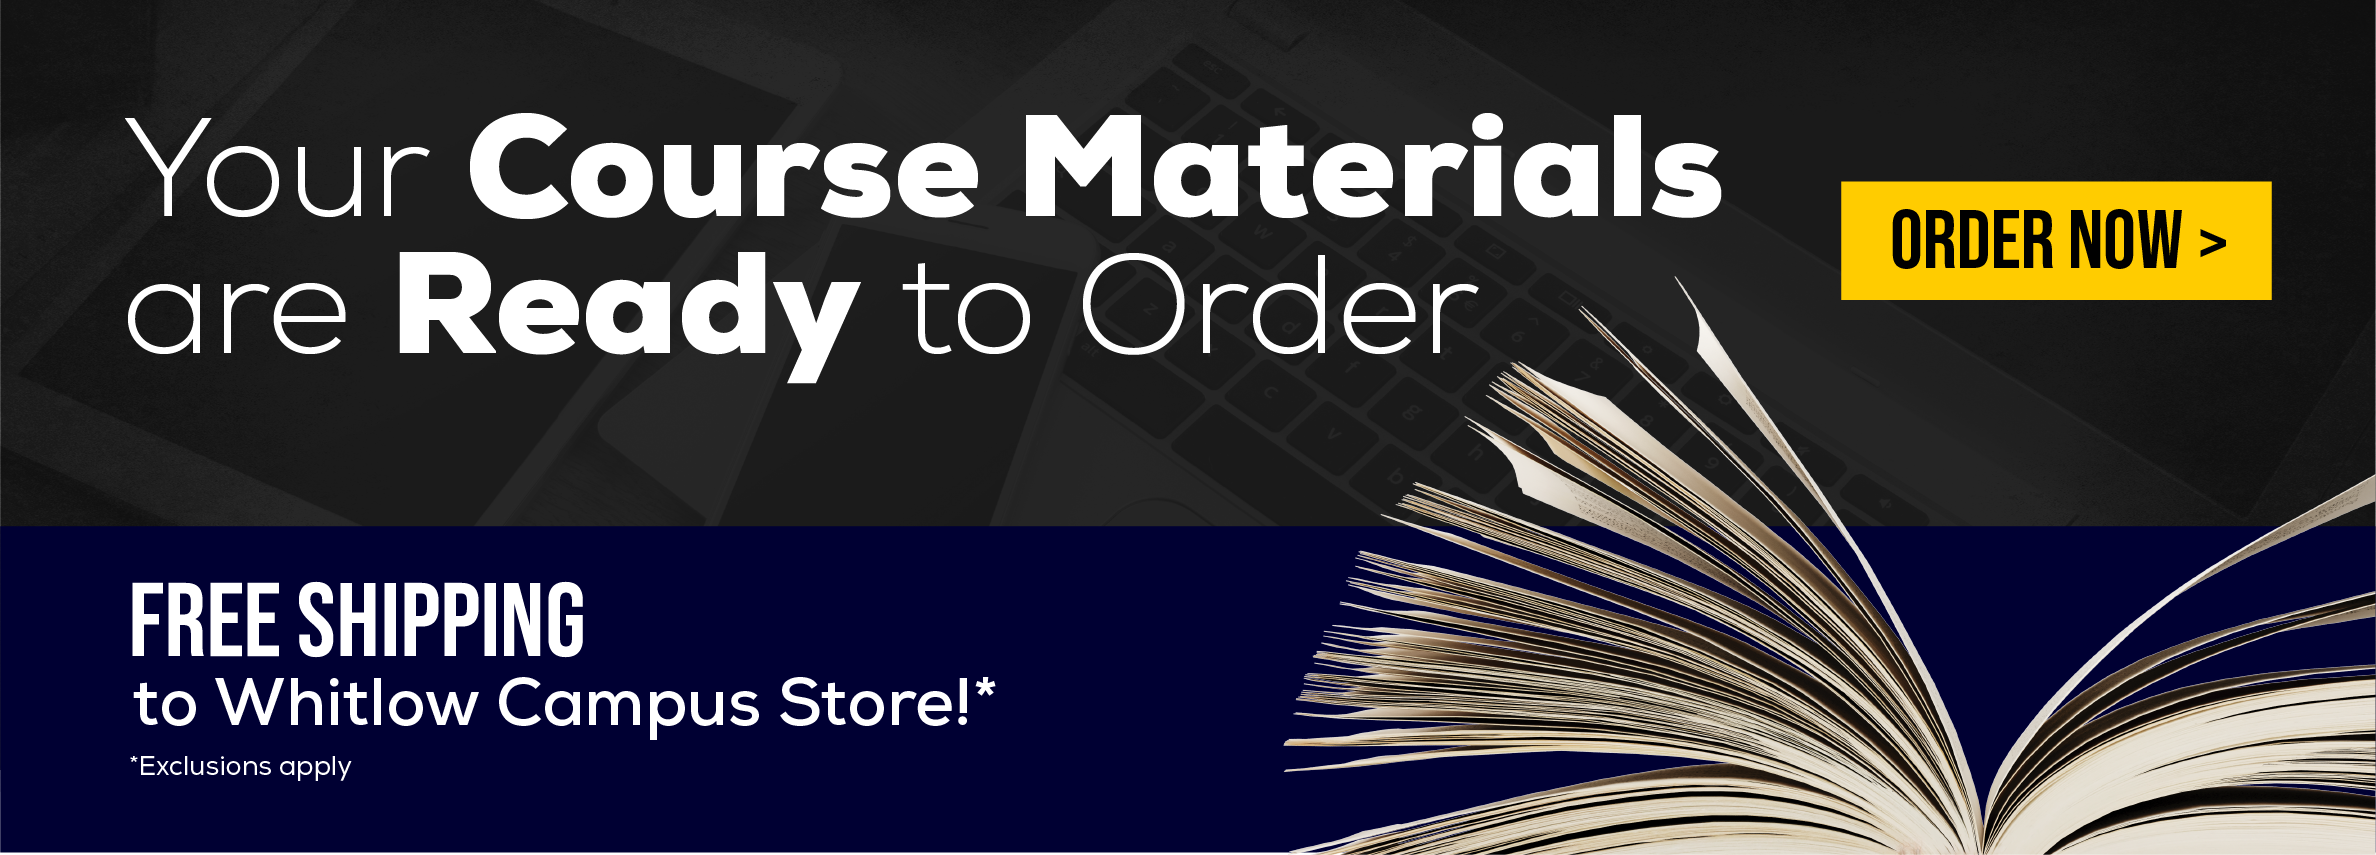 Your Course Materials are Ready to order. Free shipping to Whitlow Campus Store!* *Exclusions apply. Order now.